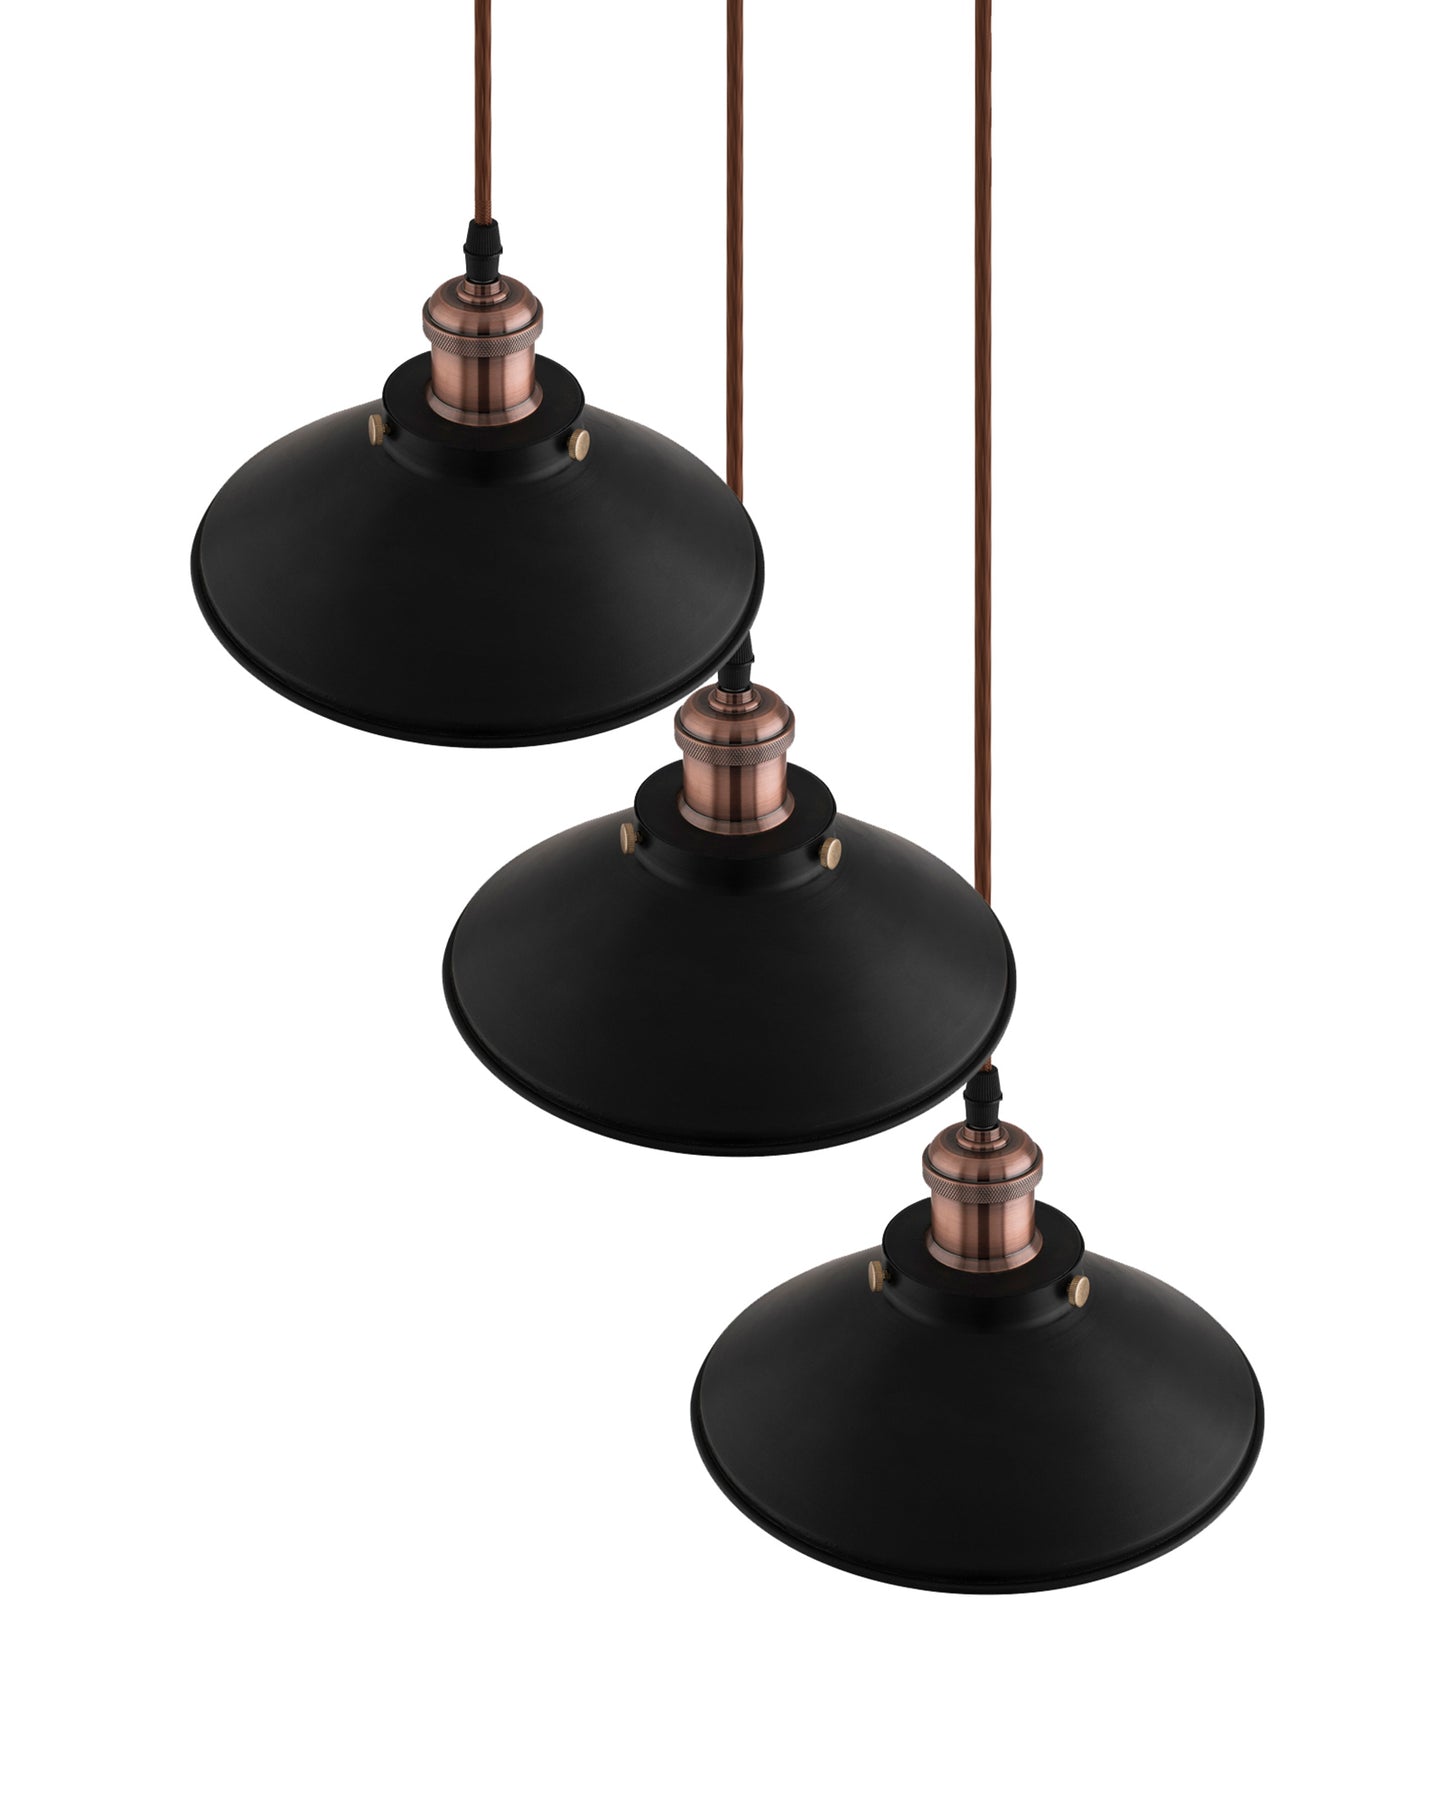 3-Lights Round Cone Shade Cluster Chandelier Hanging Light, Decorative, Black, Kitchen Area and Dining Room Light, LED/Filament Light